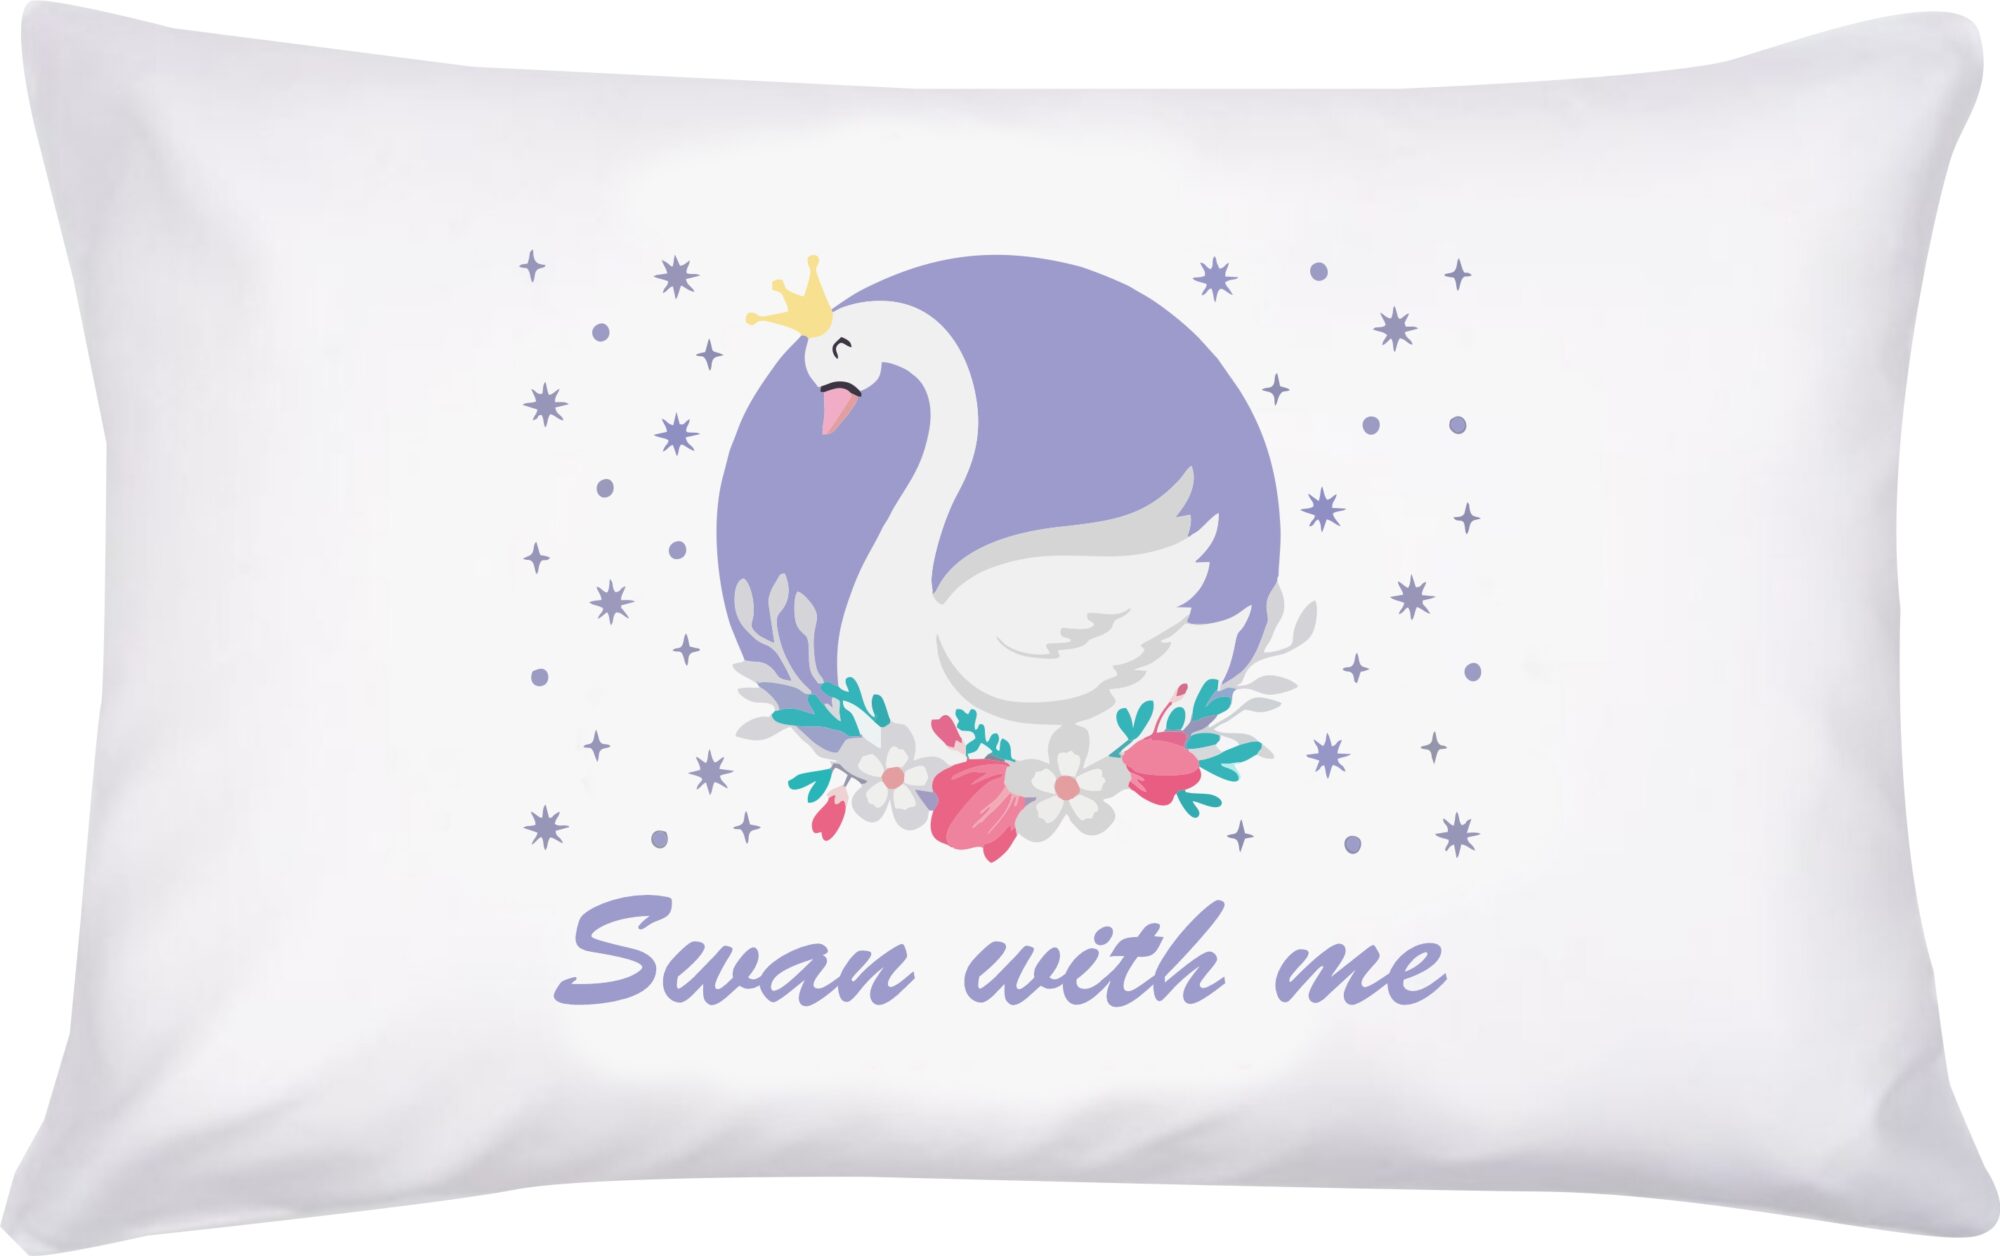 Pikkaboo Pillowcase Cover for Kids - Swan